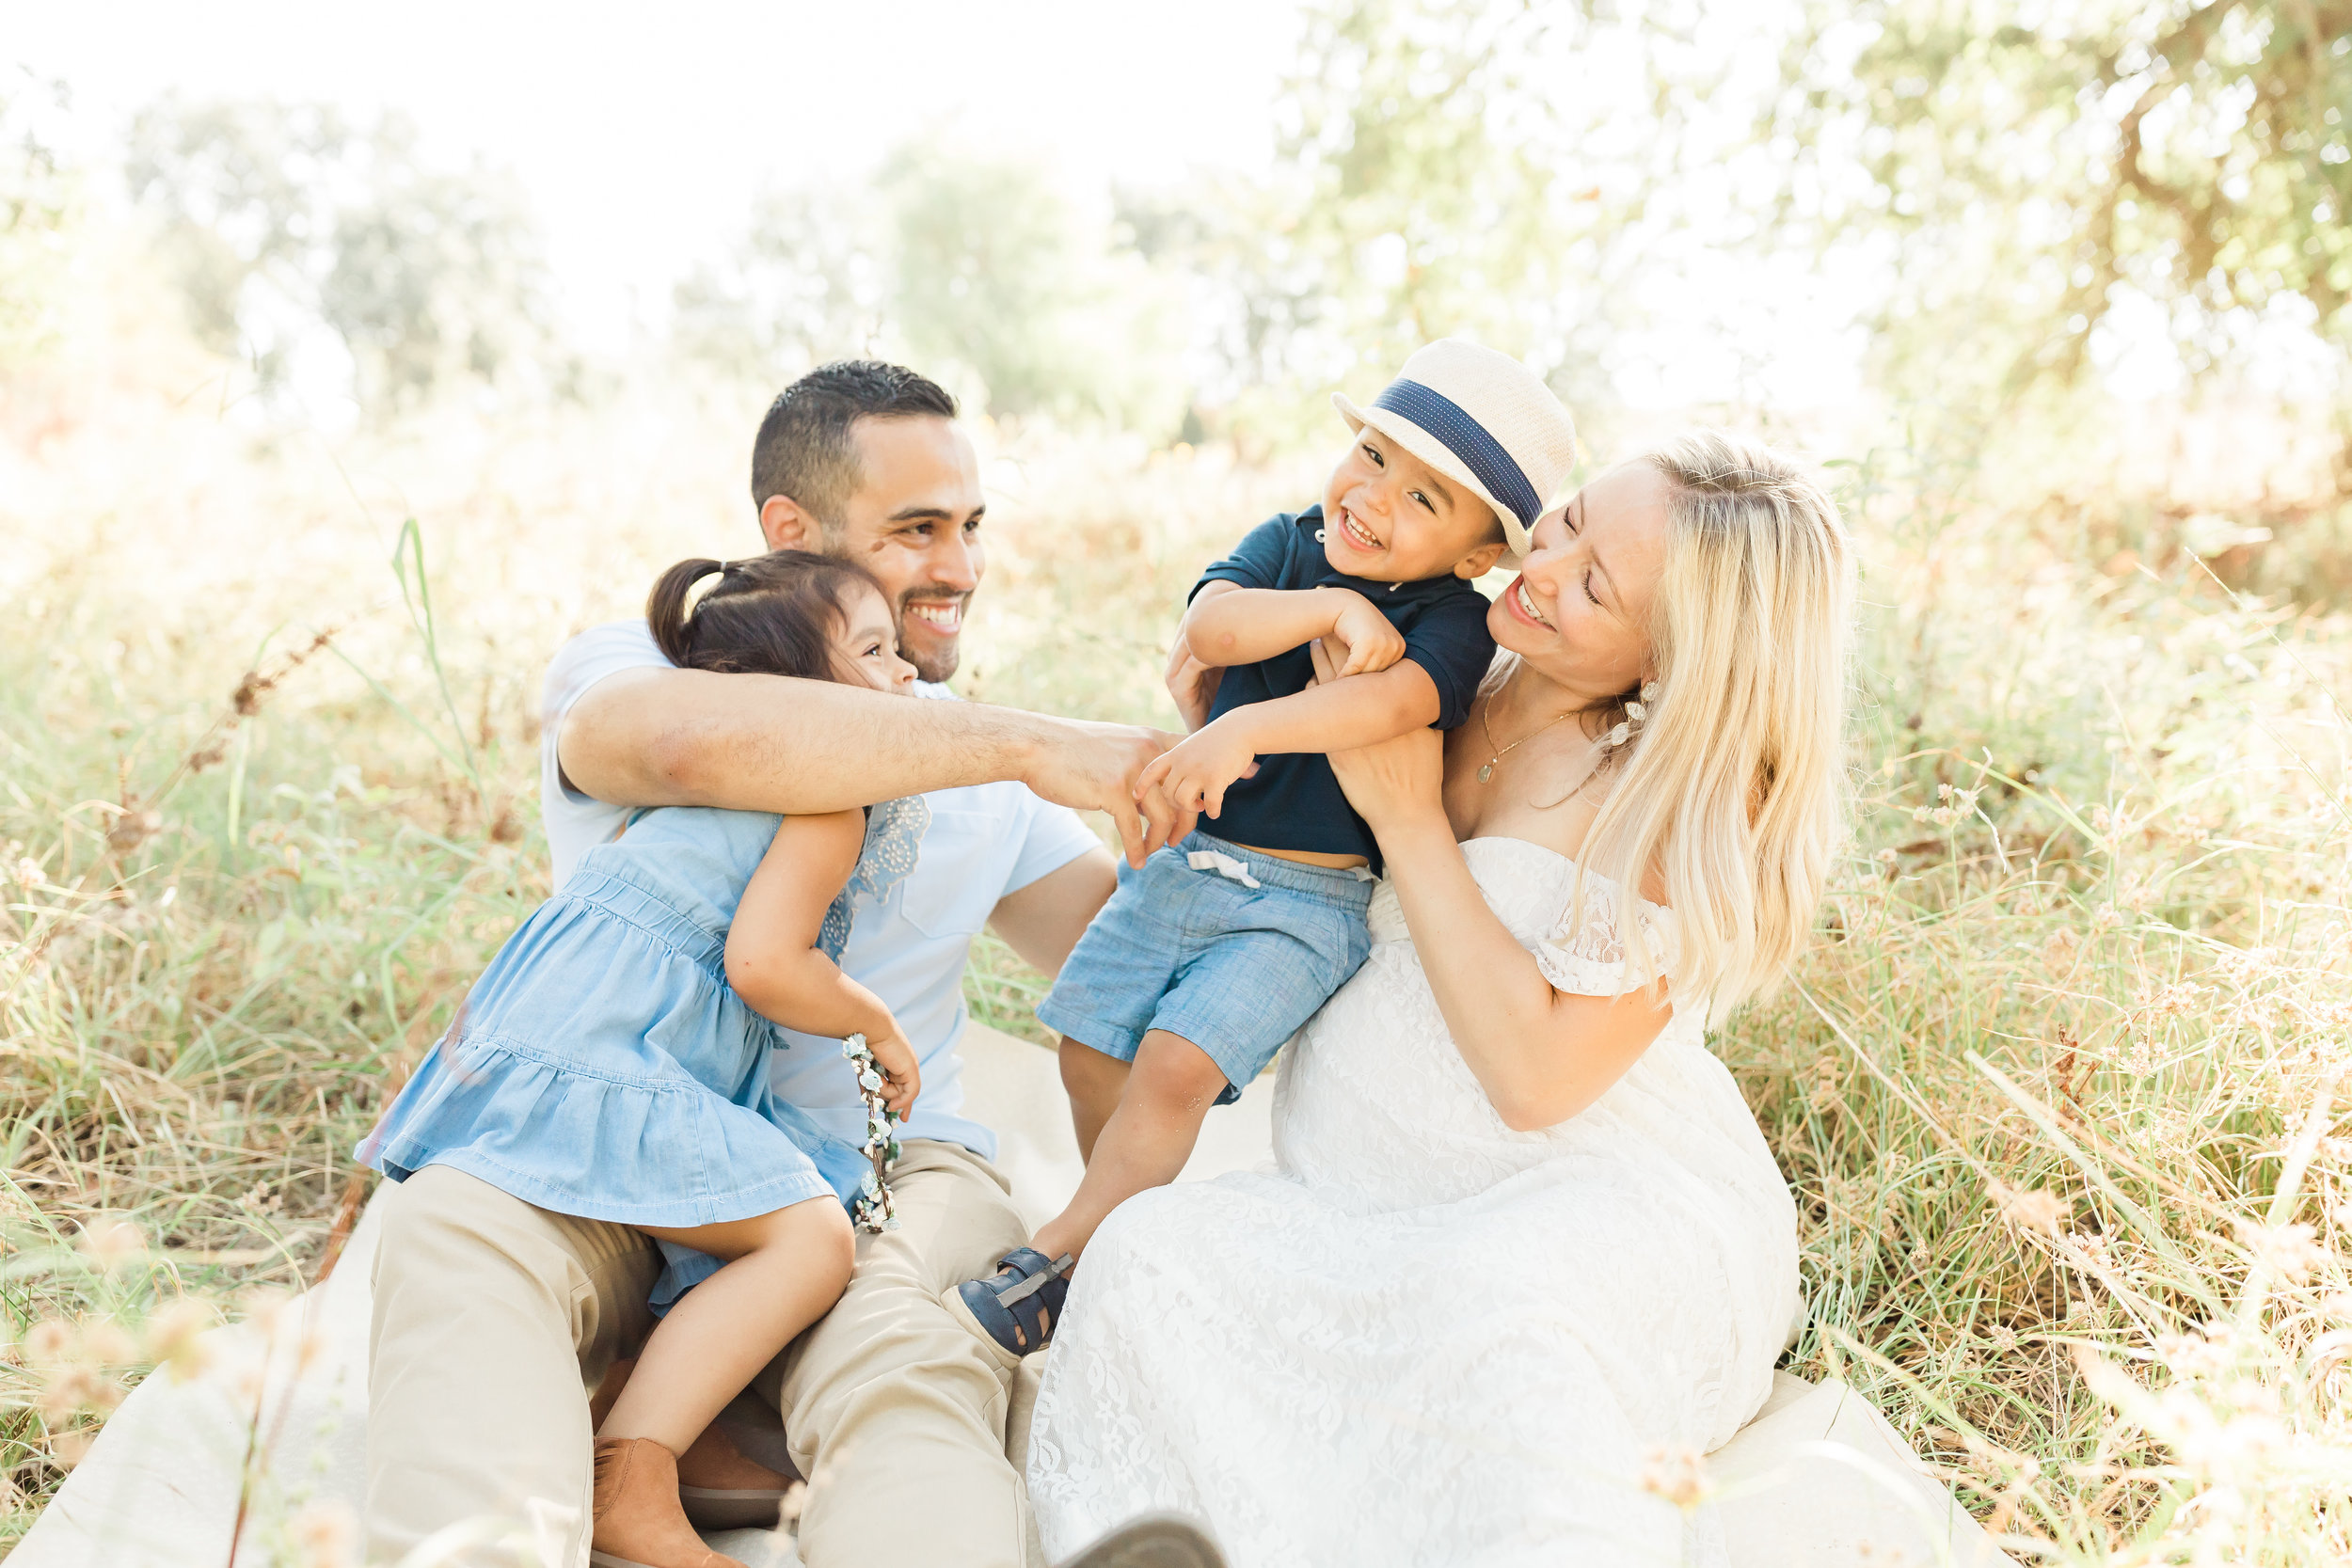 Family wearing neutrals and chambray sitting in a field tickling toddler boy. Maternity photos.